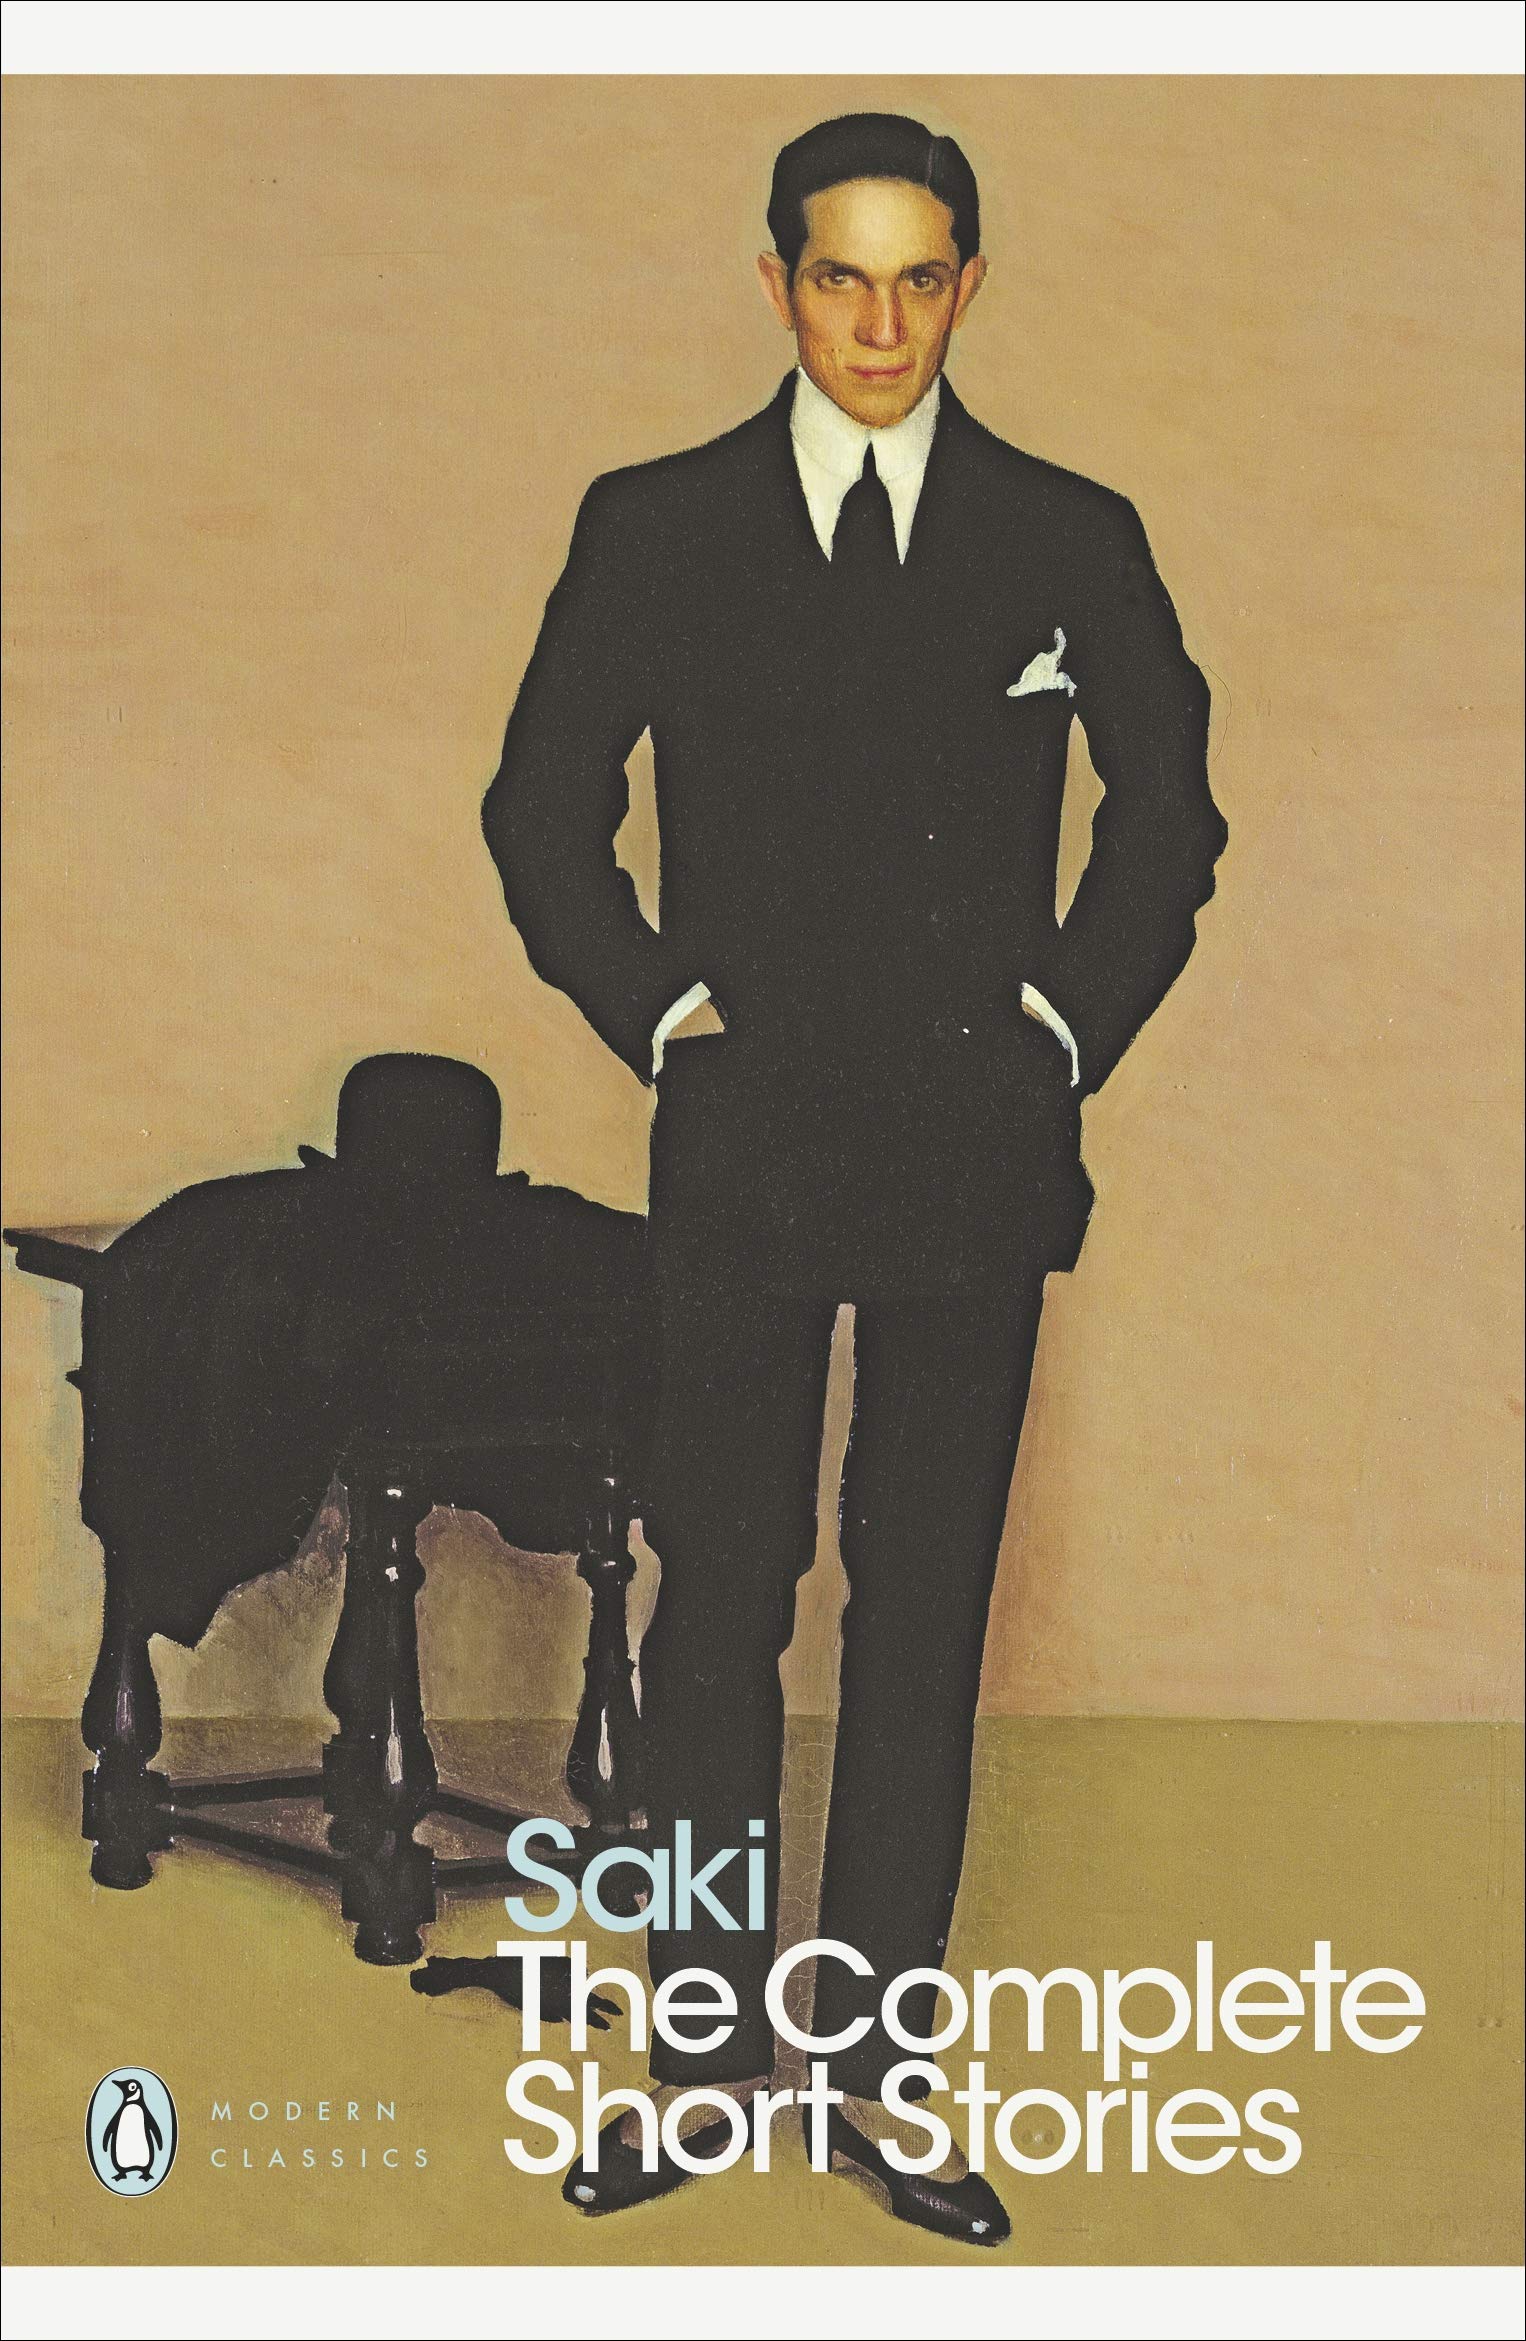 The Complete Short Stories by Saki